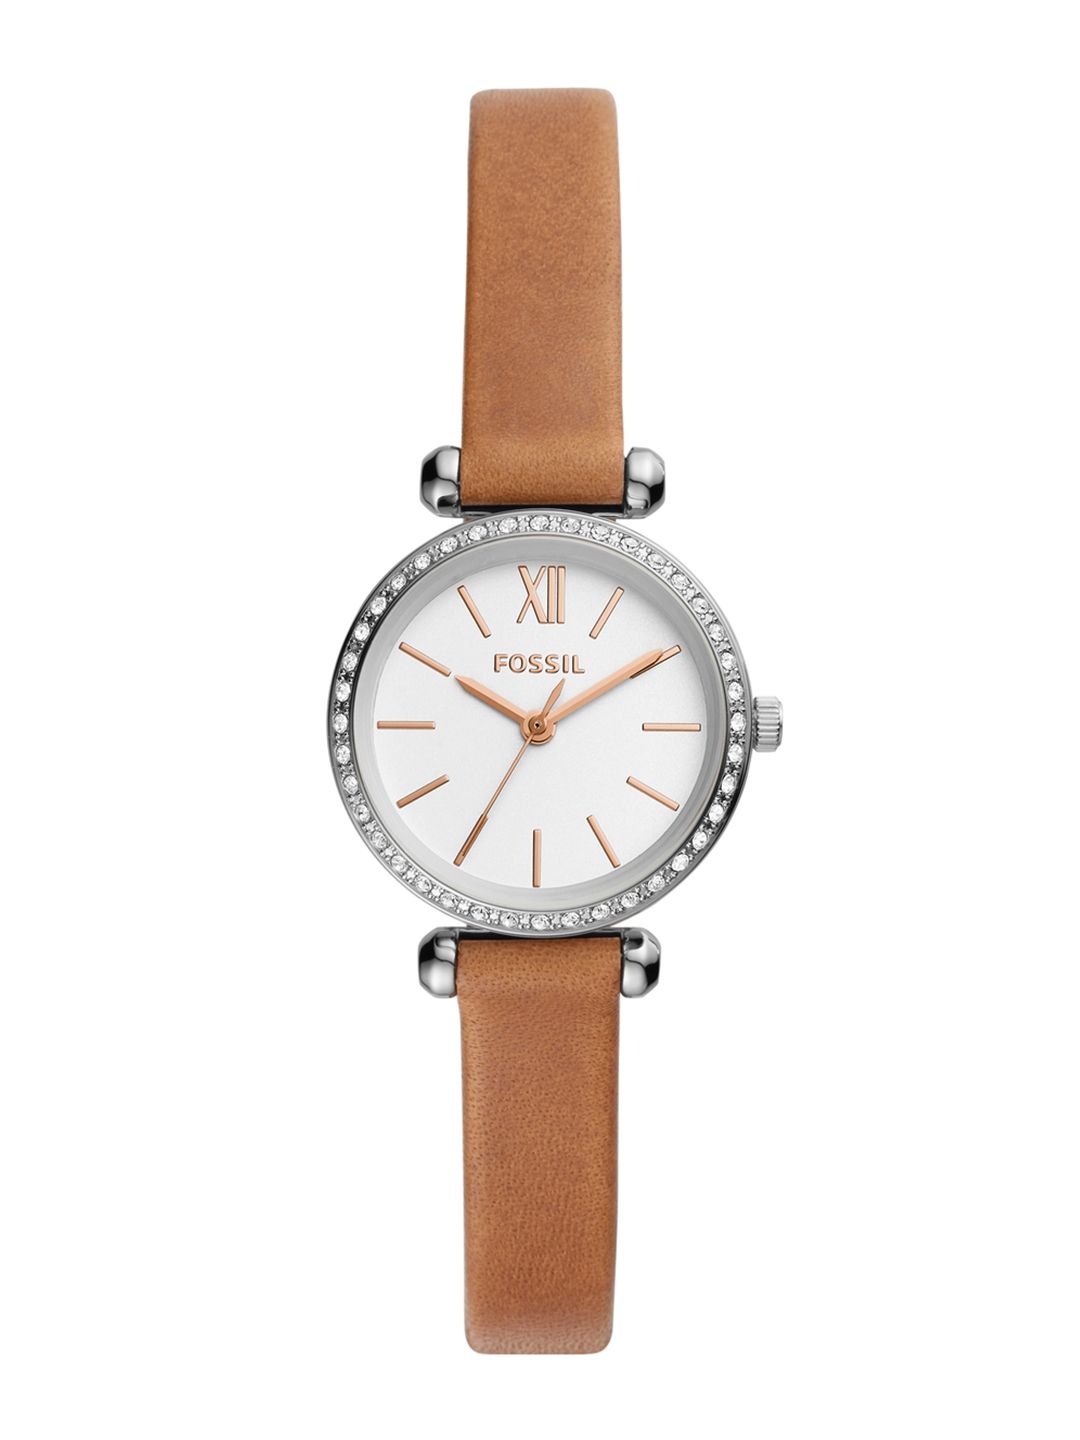 Fossil Women White Dial & Brown Leather Straps Tillie Analogue Watch BQ3504 Price in India